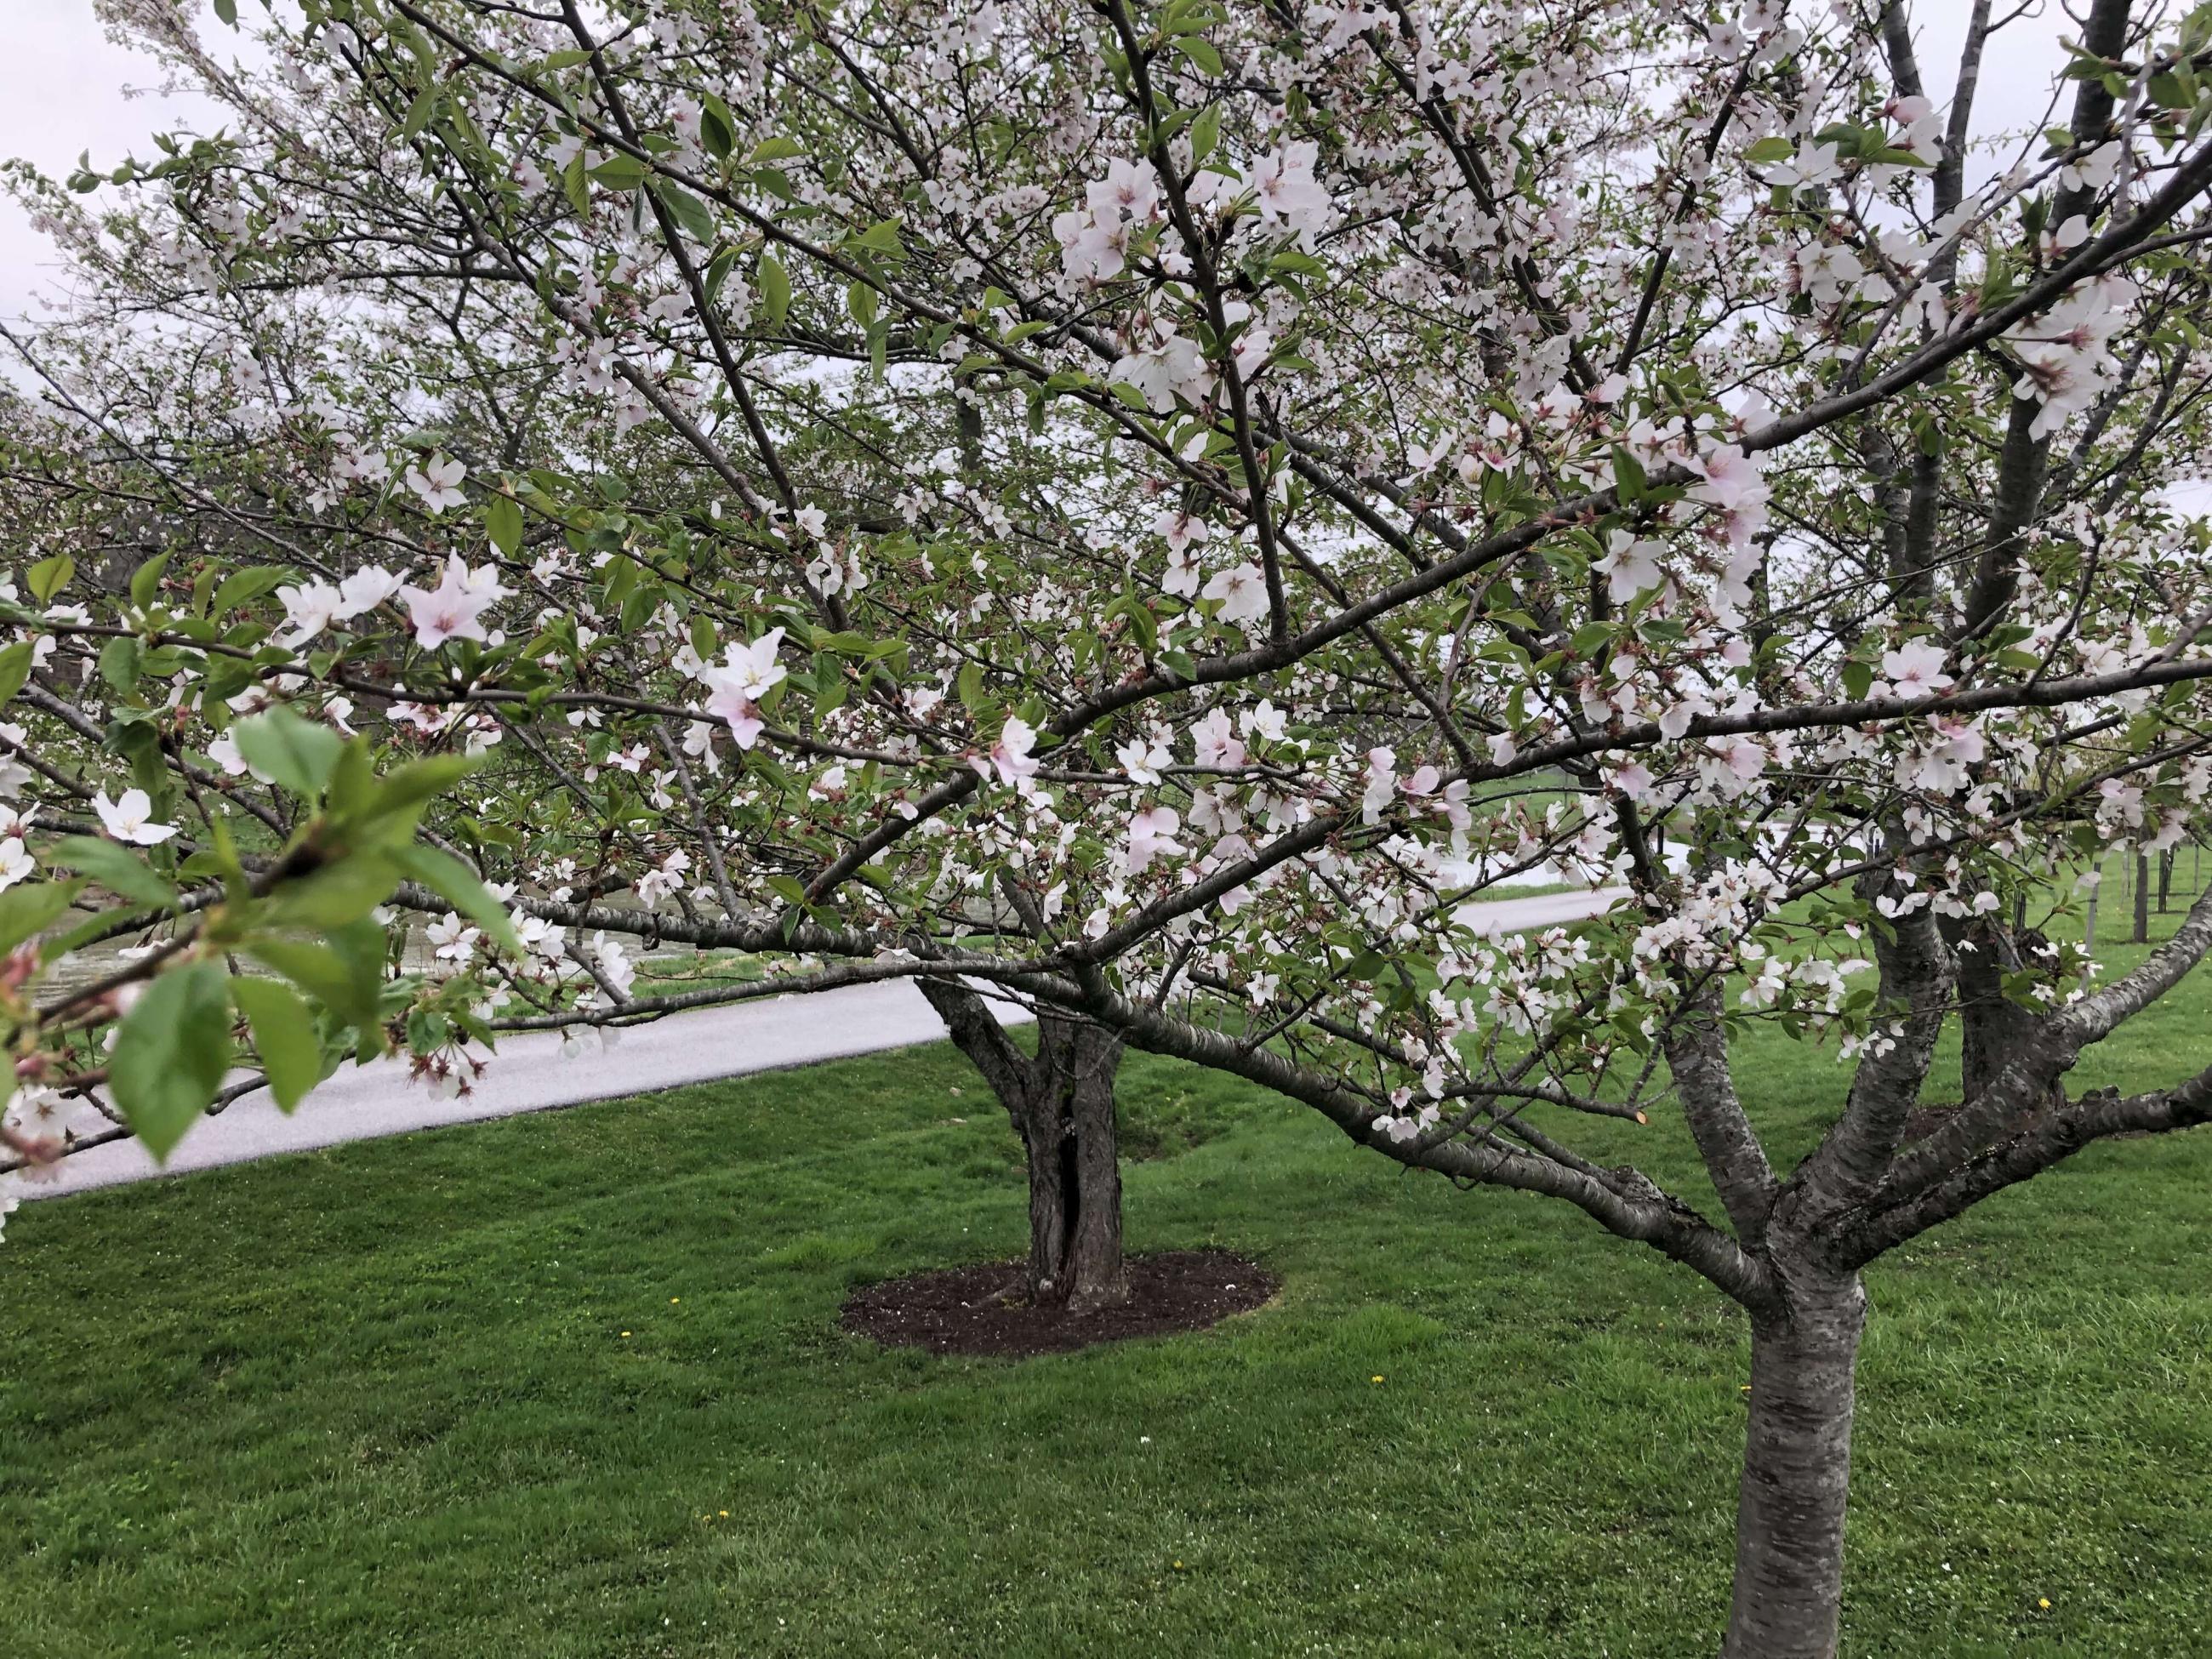 Cherry tree blossoms along the bike path beginning to turn green